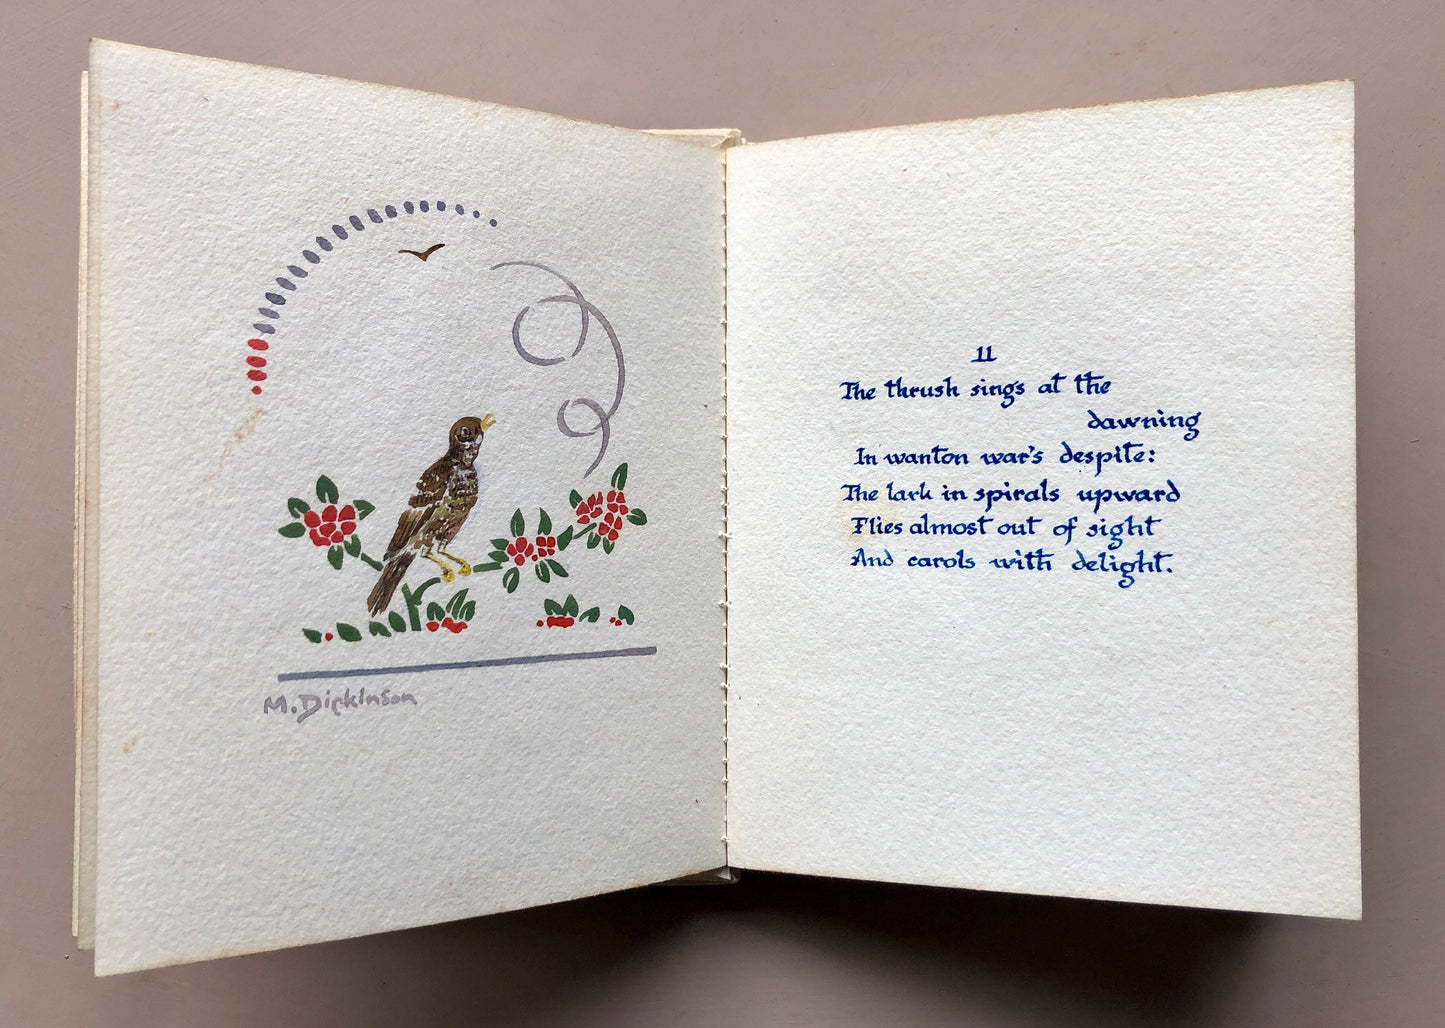 Summer in War-Time by Allan MacDonald Laing. A handmade book with poem amd watercolour illustrations by M. Dickinson. 15 x 12.5 cms.